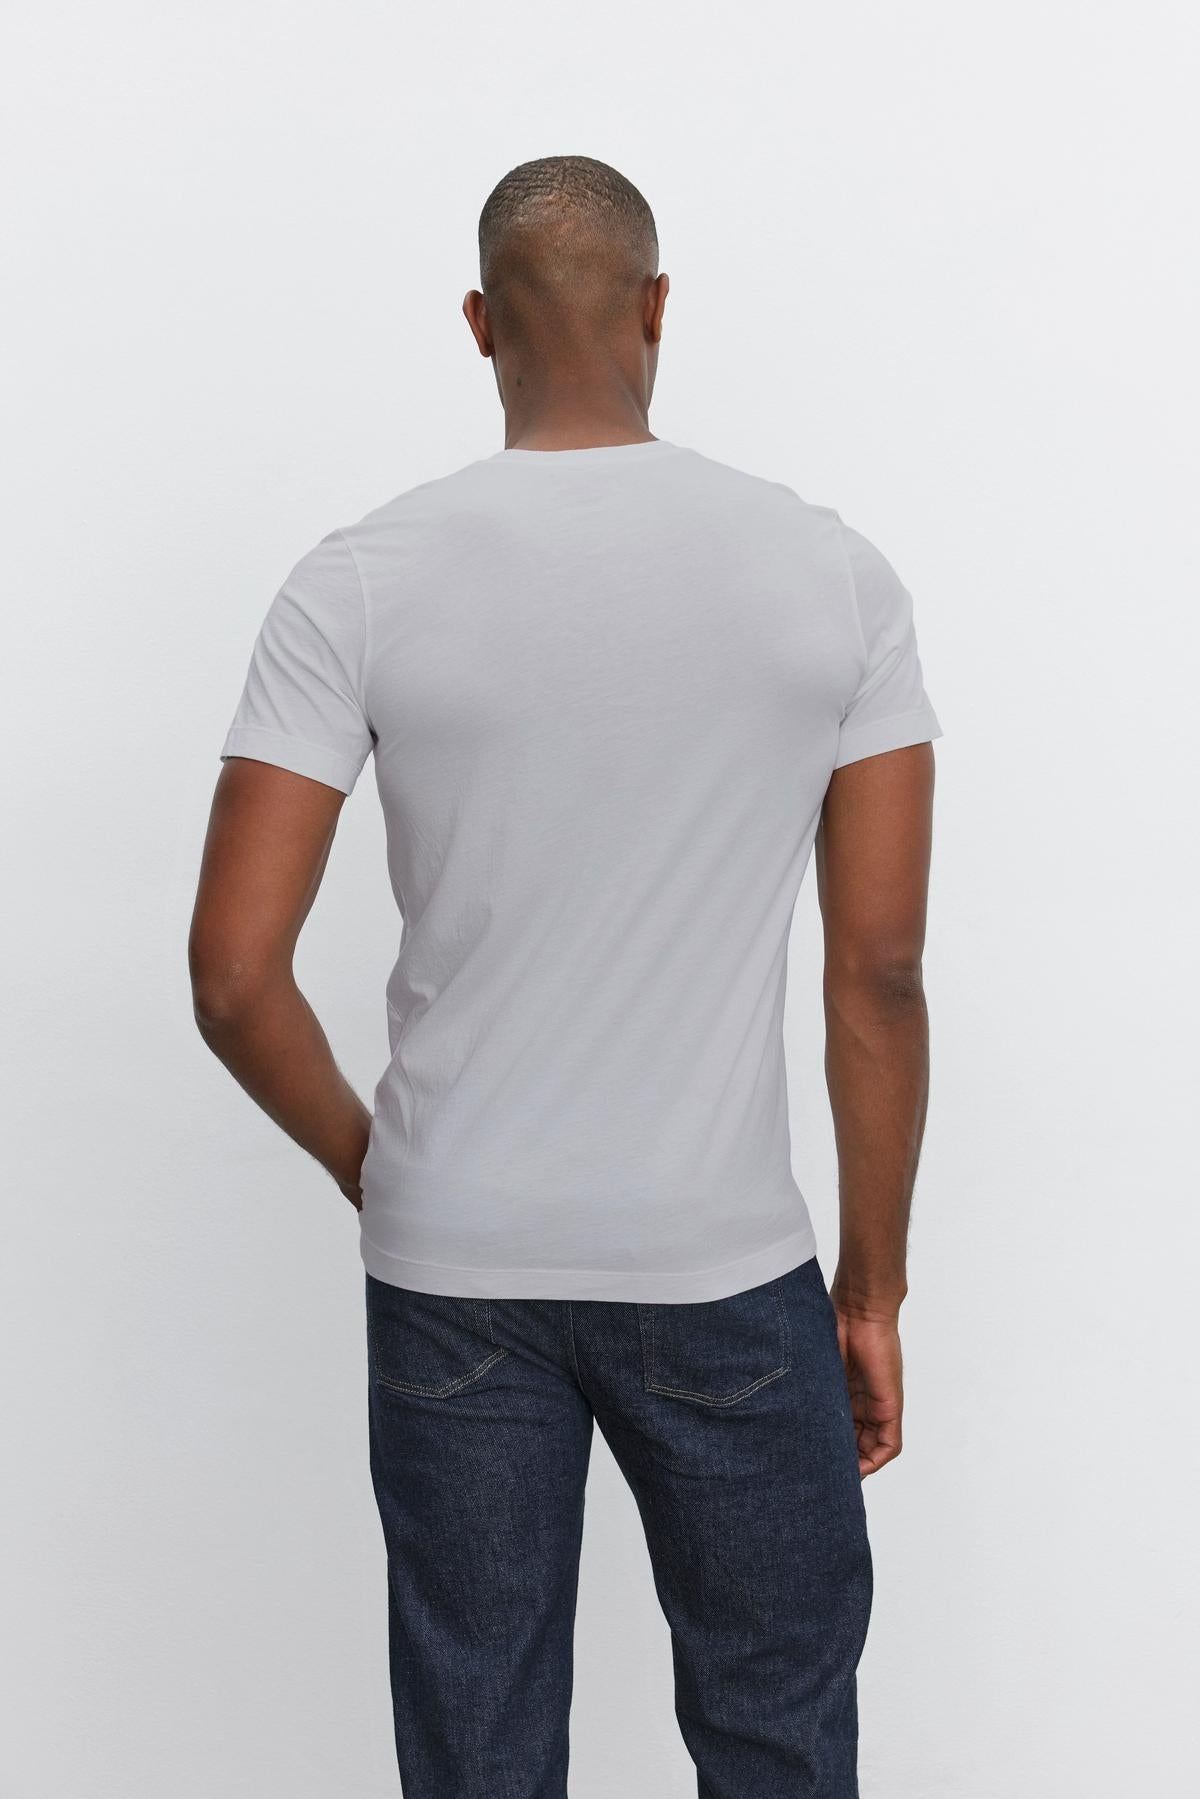 Man wearing a Velvet by Graham & Spencer SAMSEN TEE with a v-neckline and dark blue jeans, standing with his back to the camera against a plain white background.-37386135404737